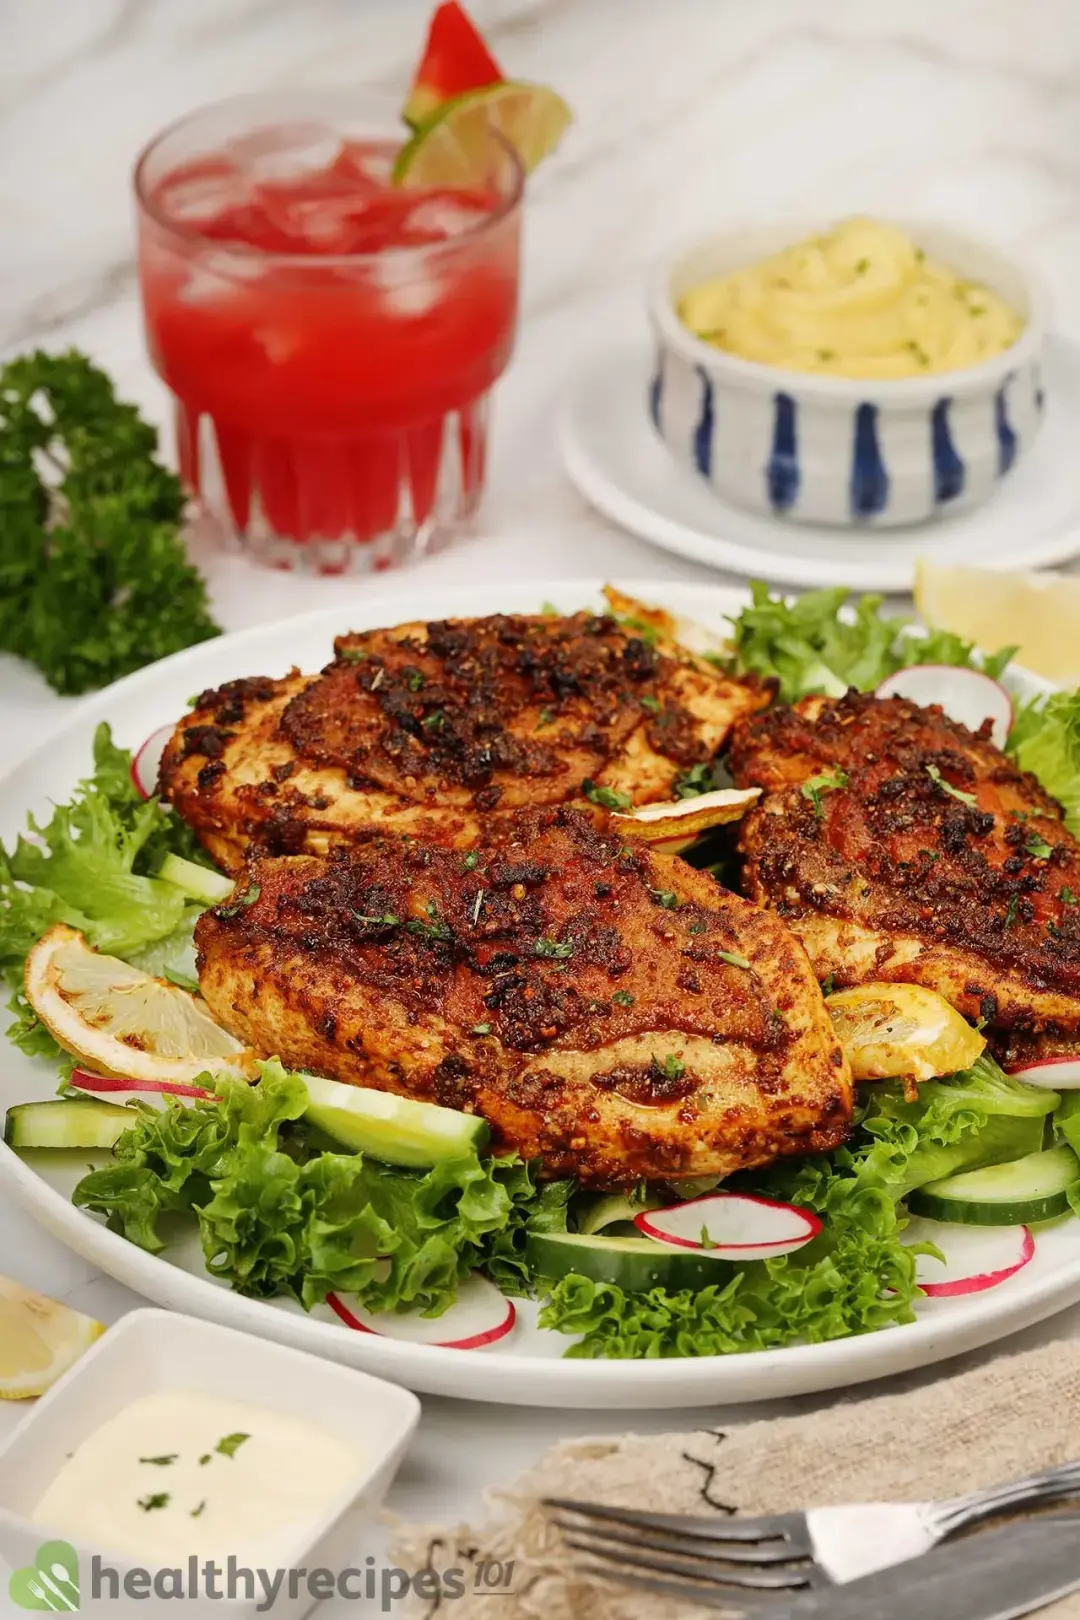 What to Serve With Blackened Chicken